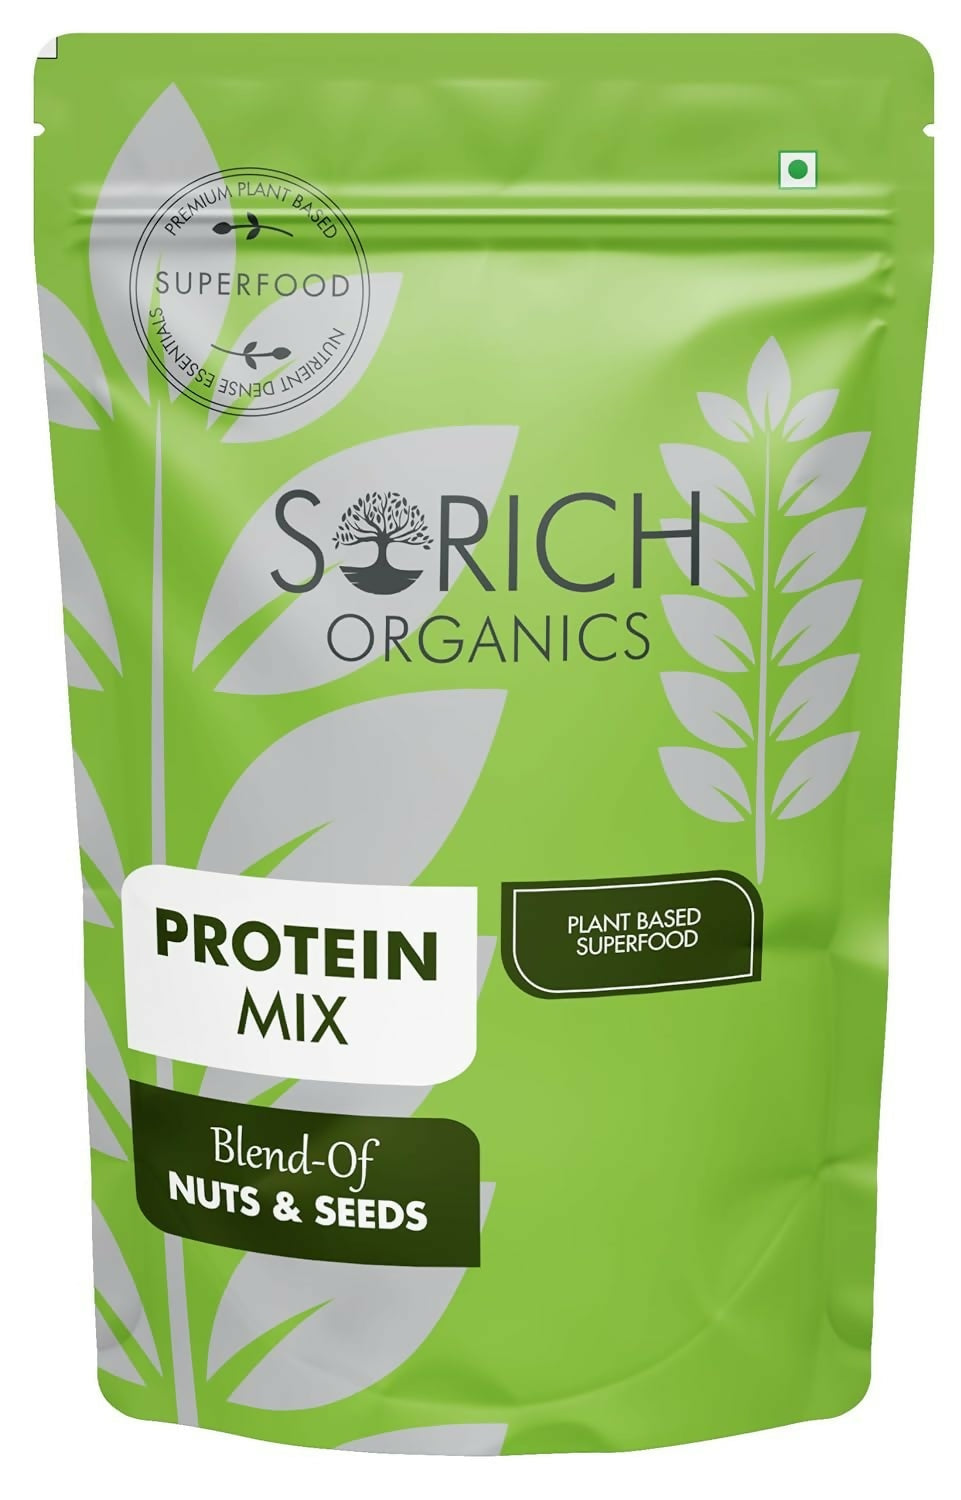 Sorich Organics Protein Mix Seeds and Nuts - BUDNE